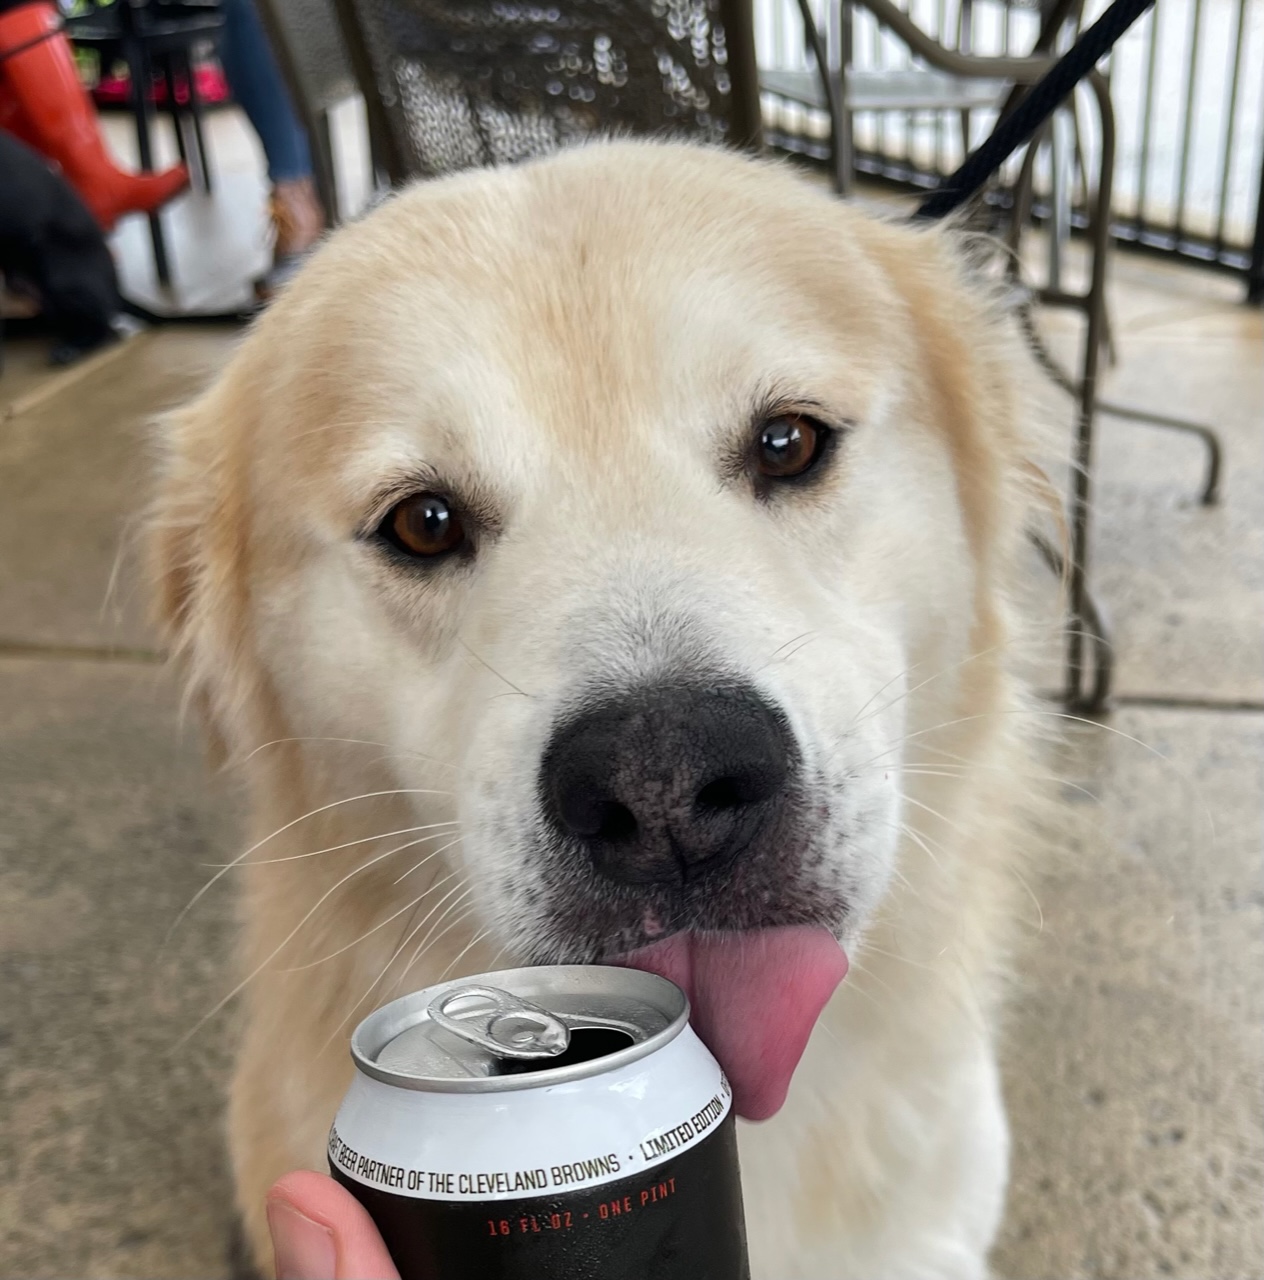 Karl the dog licking a can.